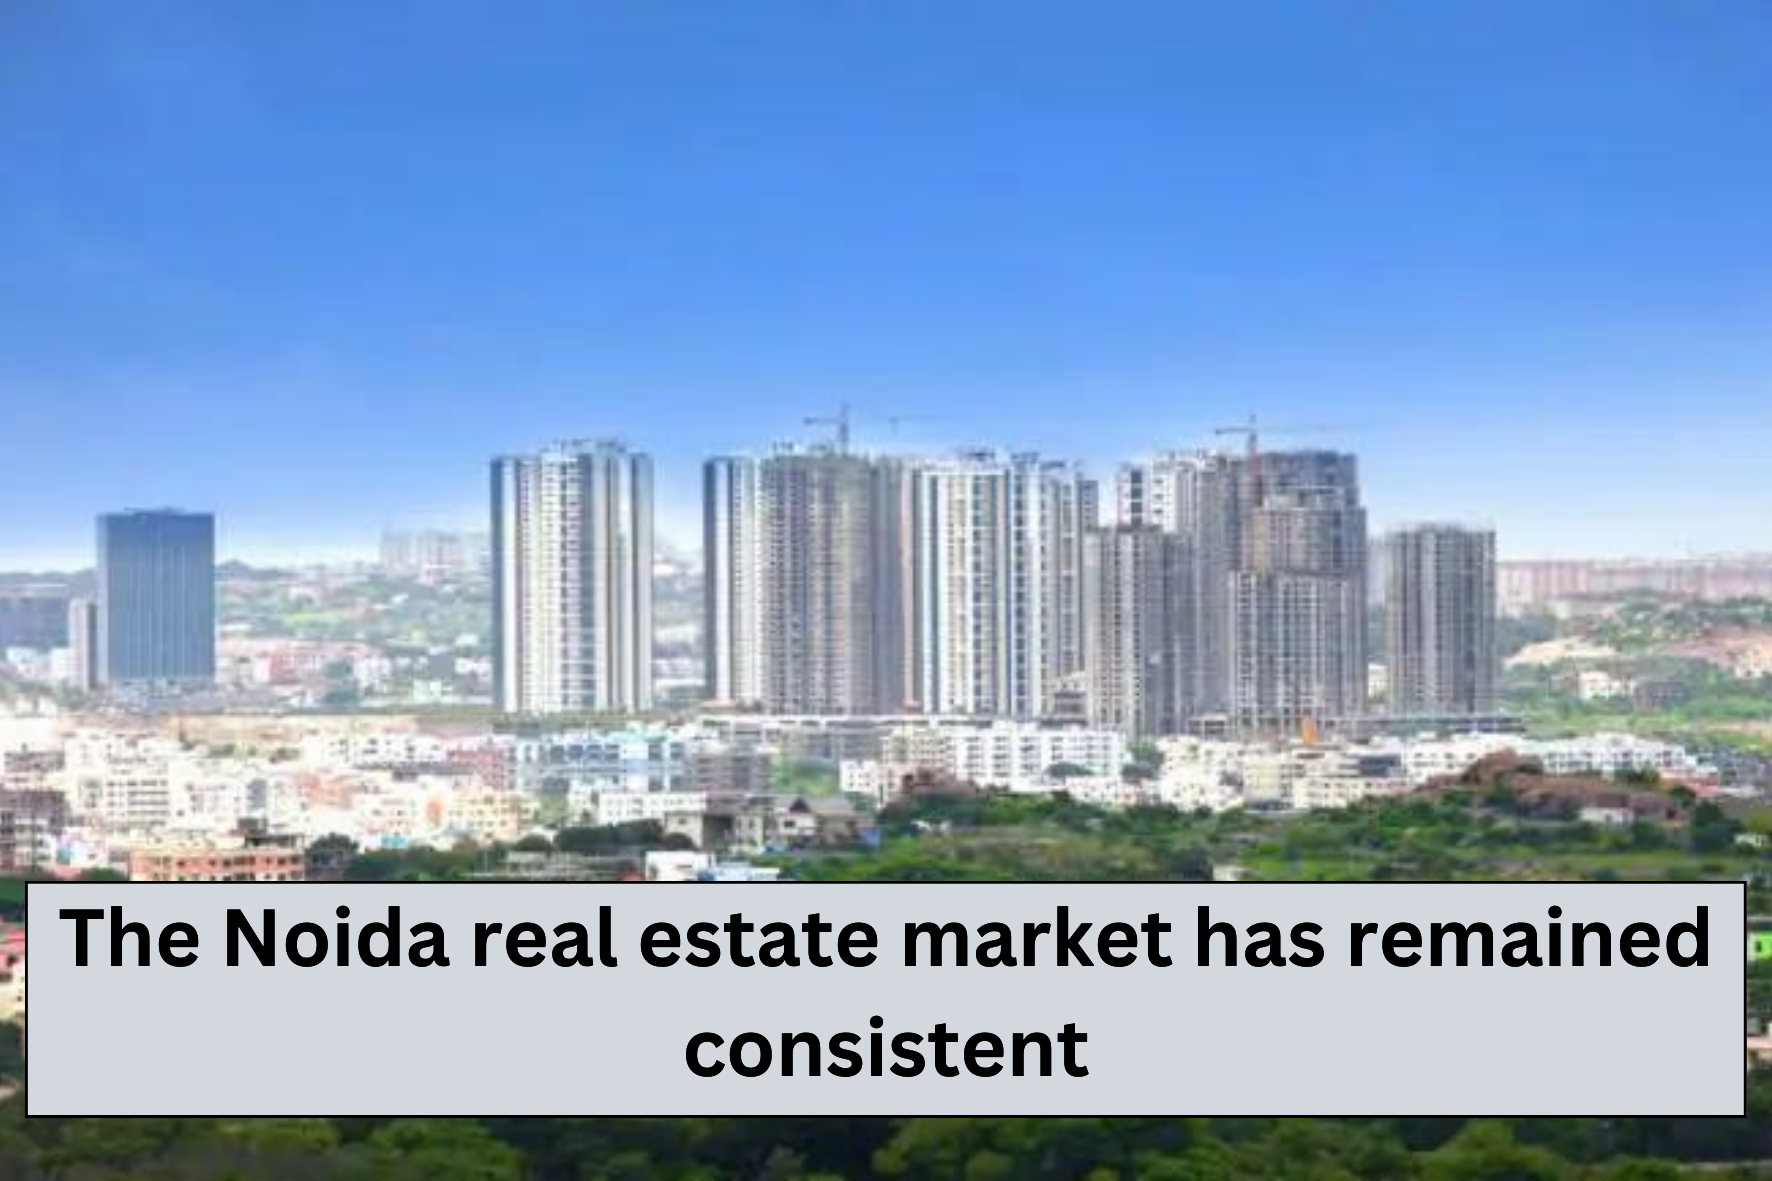 uploads/blog/The_Noida_real_estate_market_has_remained_consistent.png